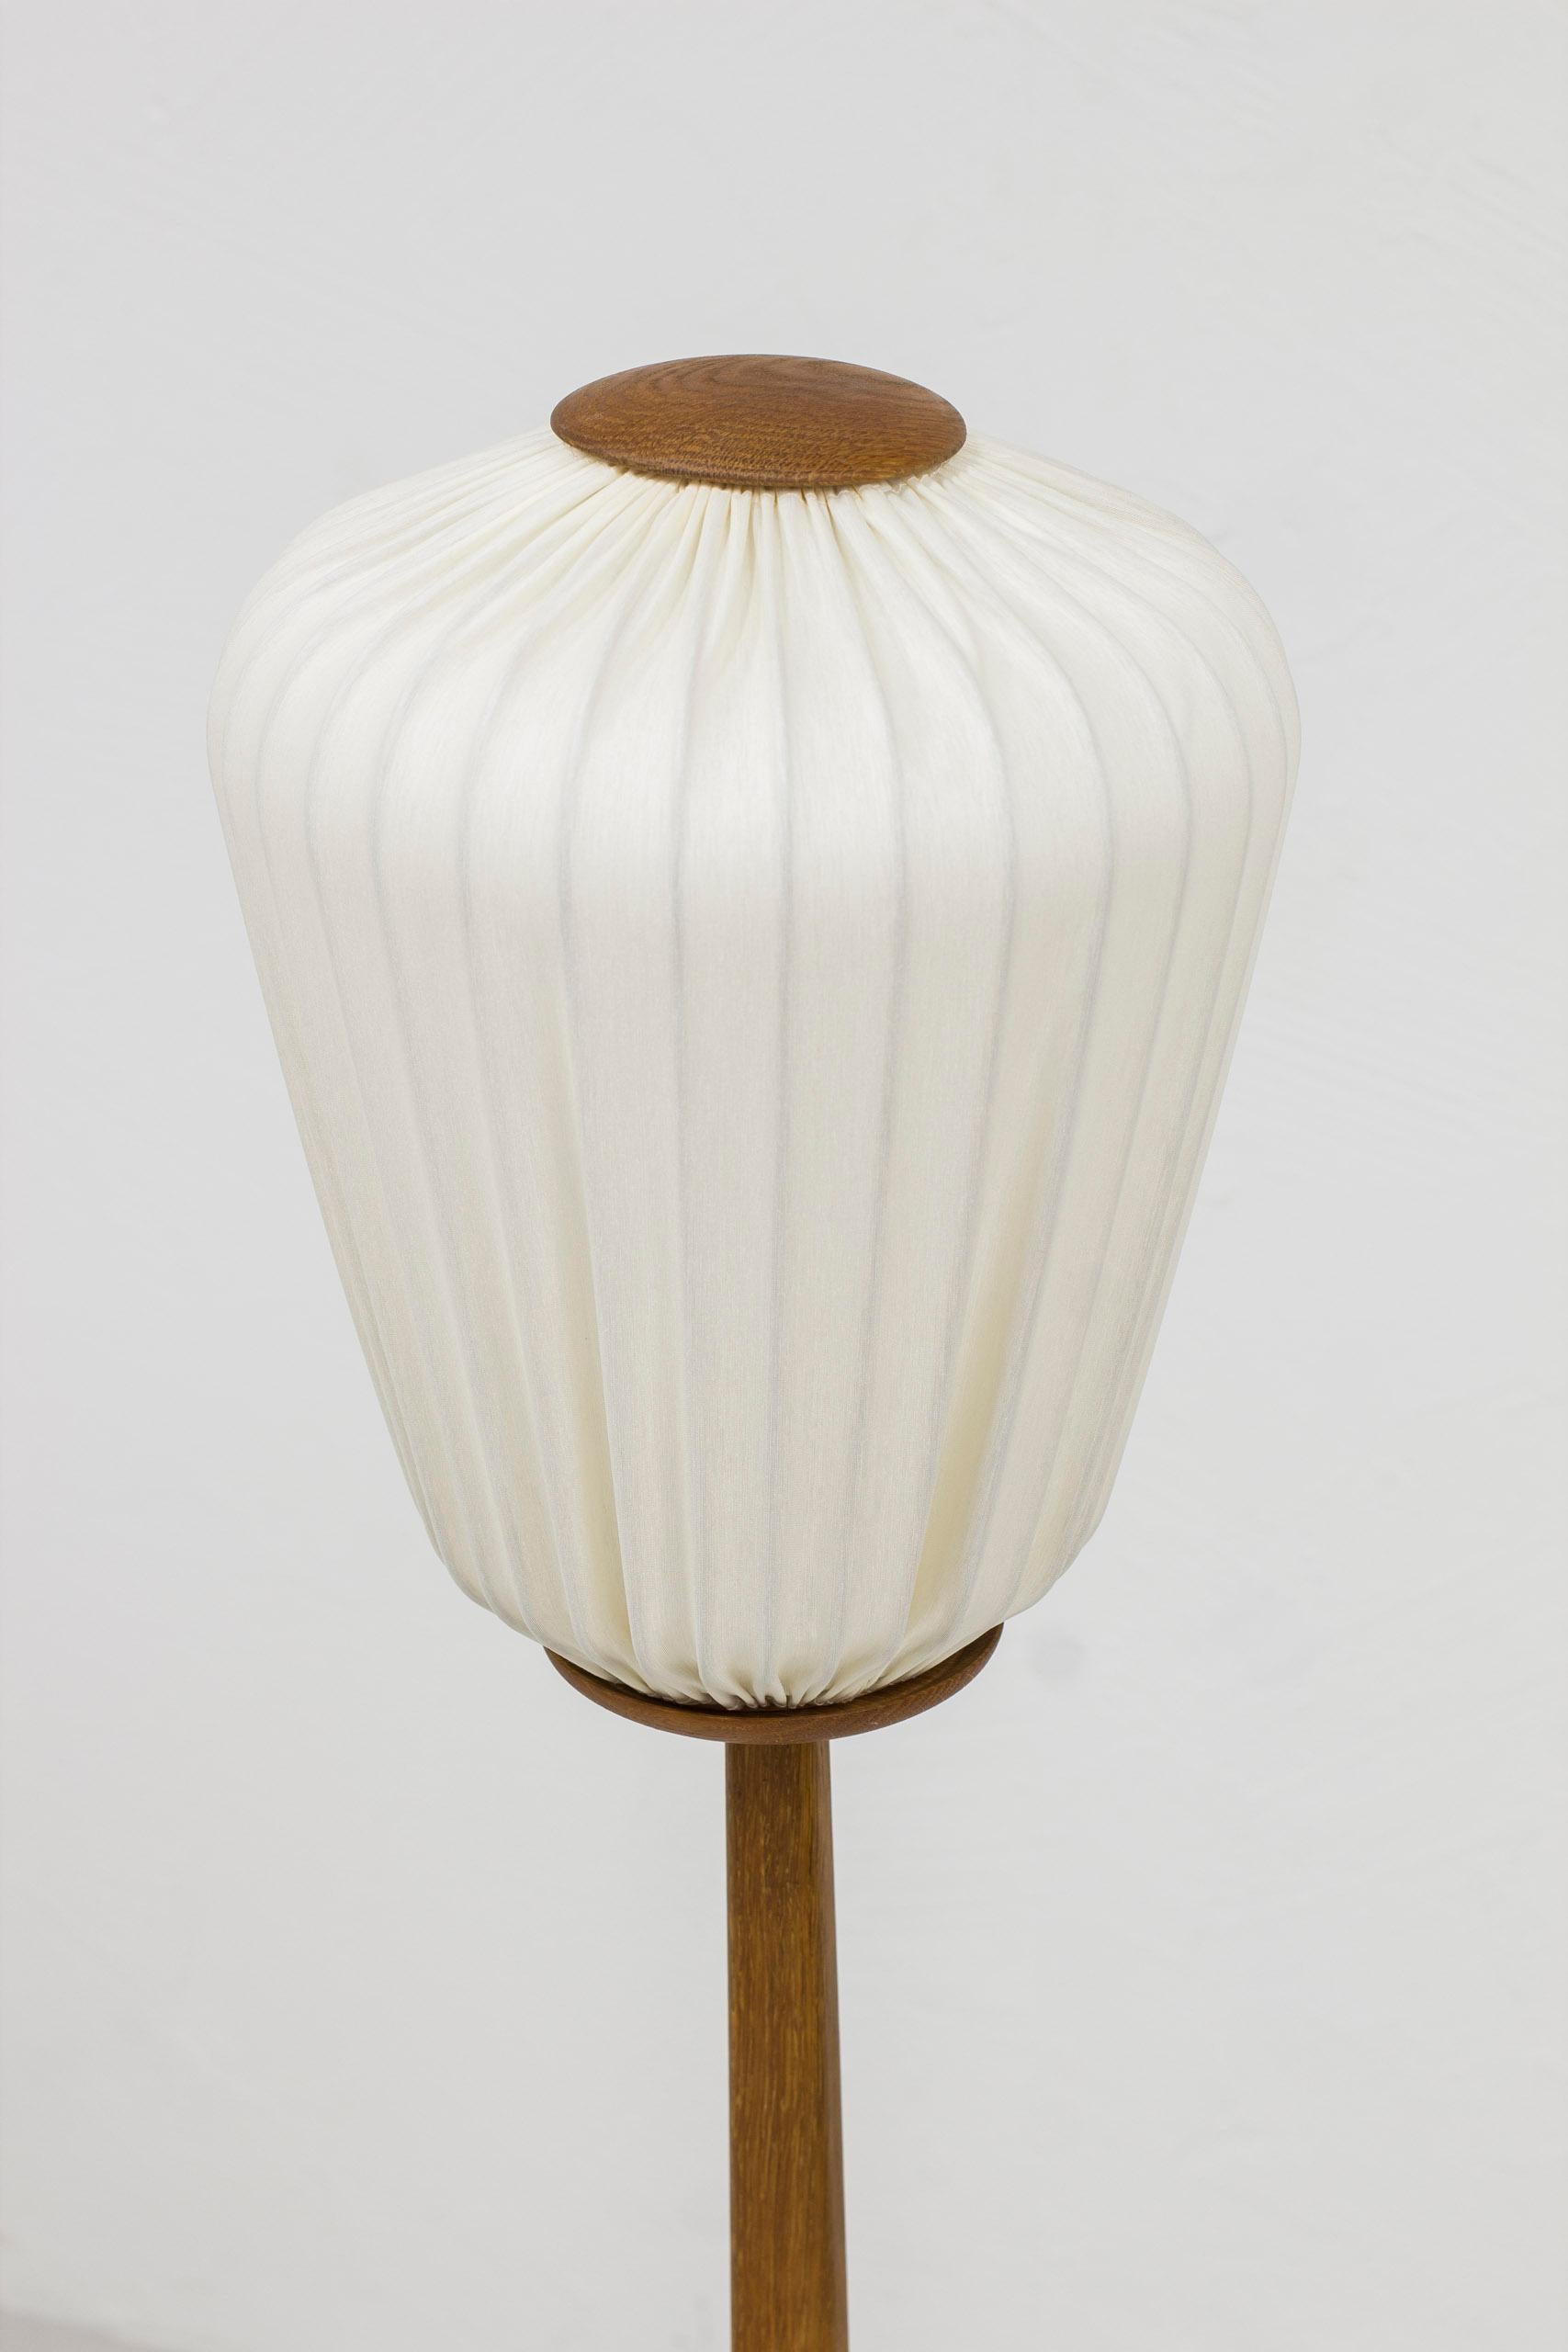 Swedish Earlt floor lamp in oak and fabric by Luxus, Uno Kristiansson, Sweden, 1950s For Sale